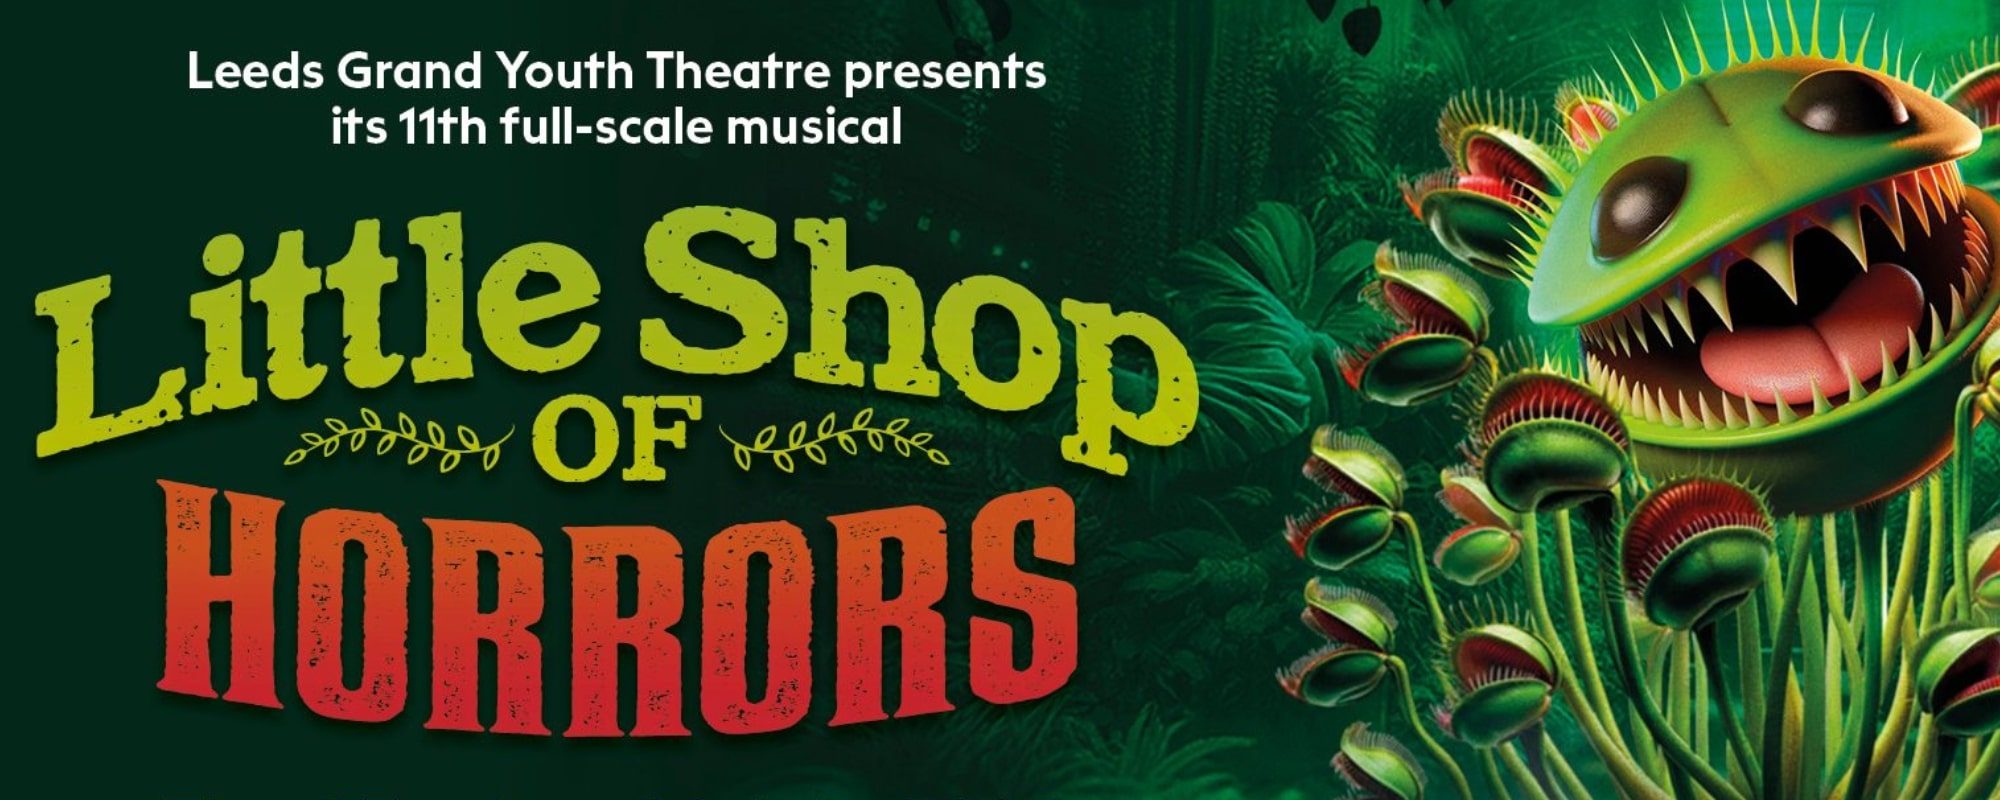 Leeds Grand Youth Theatre present Little Shop of Horrors official artwork featuring a extra-terrestrial fly trap plant.